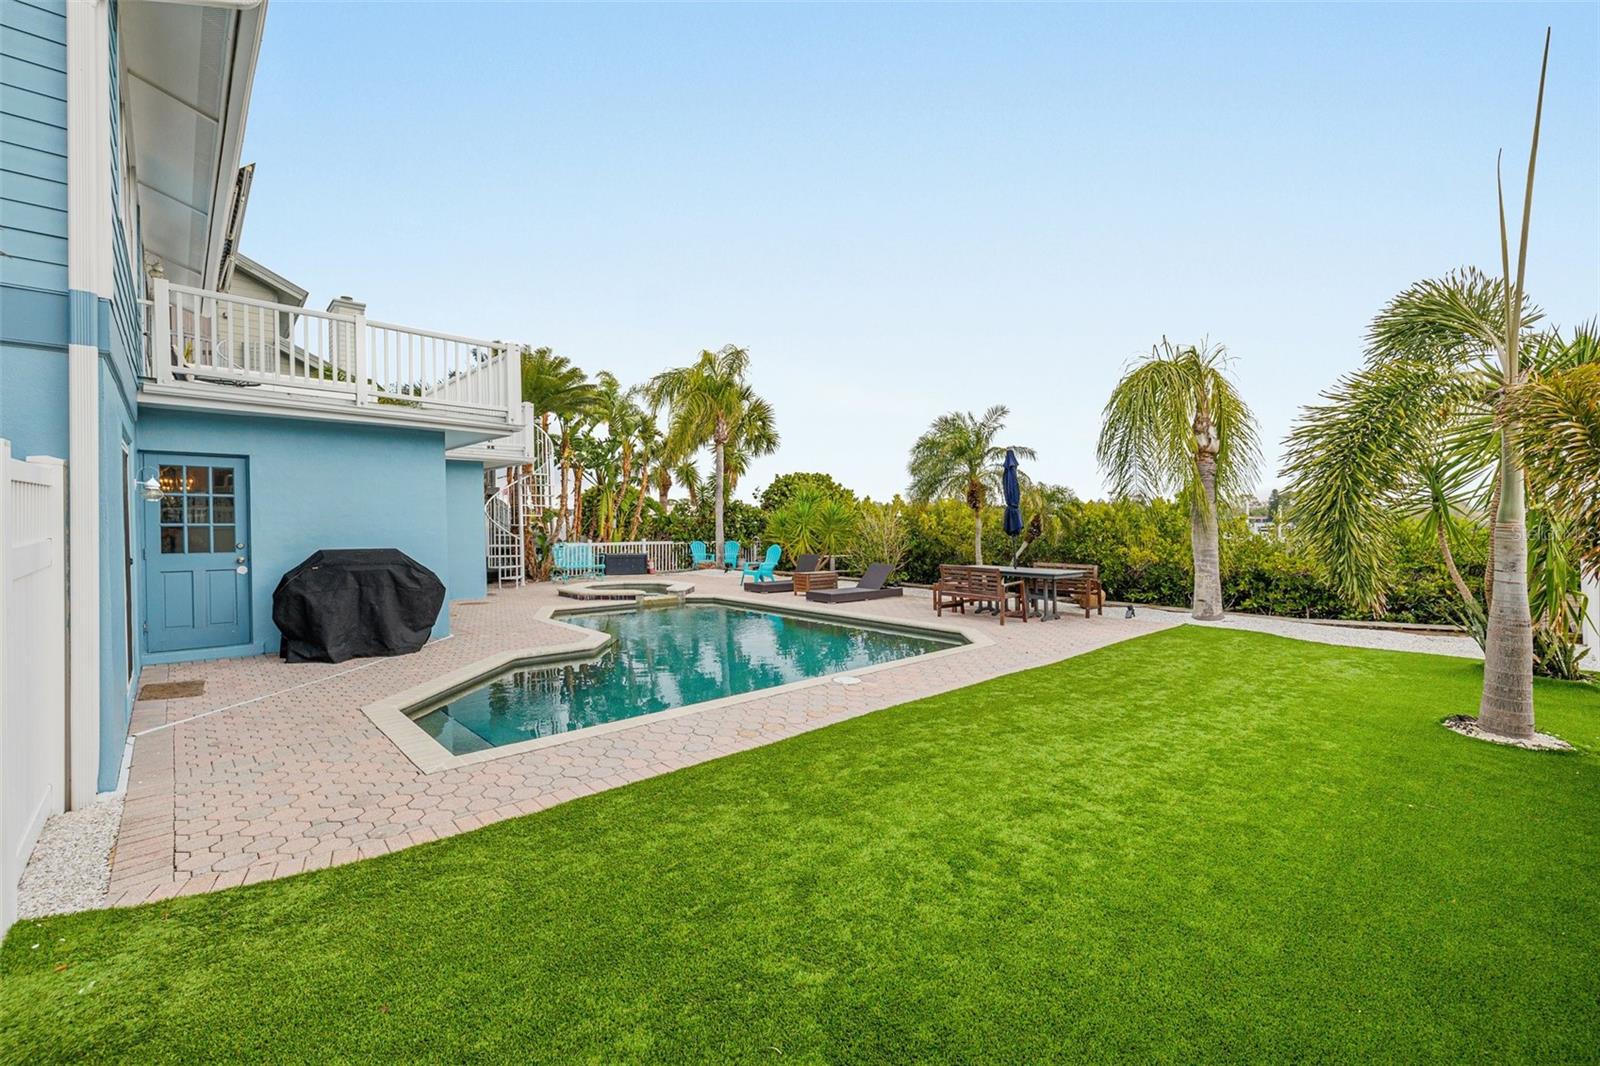 Heated pool with artificial turf.